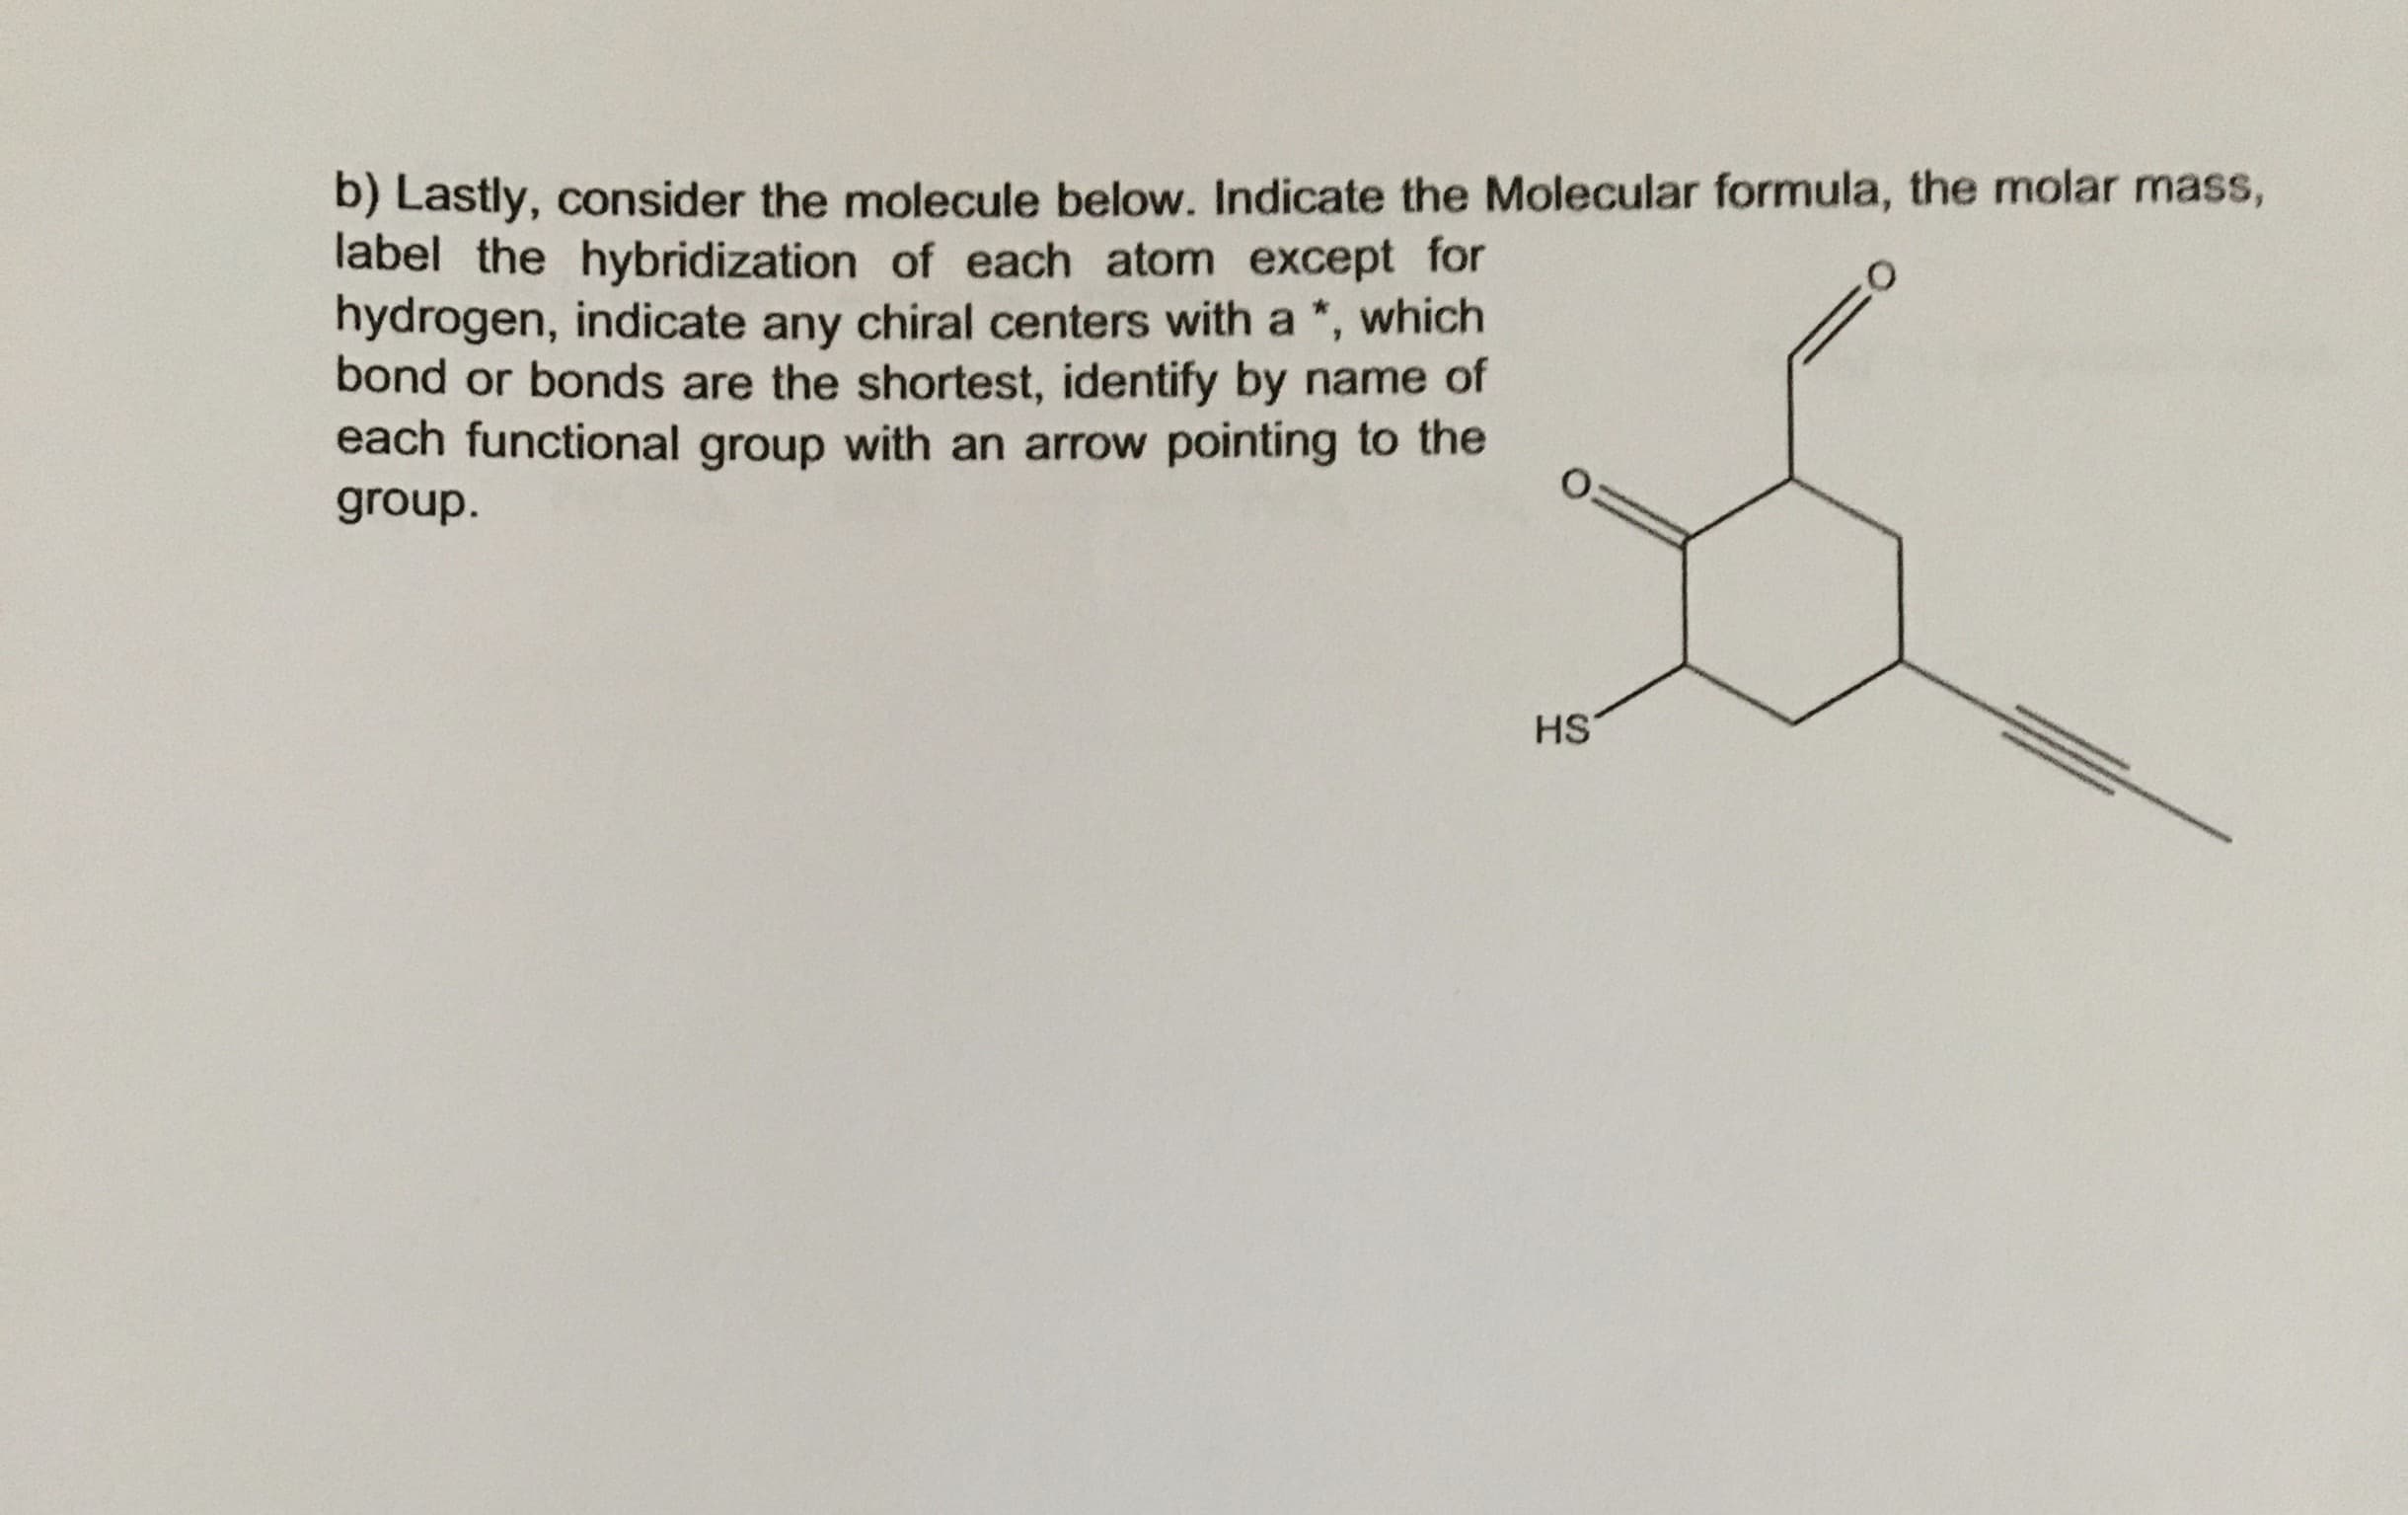 b) Lastly, consider the molecule below. Indicate the Molecular formula, the molar mass,
label the hybridization of each atom except for
hydrogen, indicate any chiral centers with a *,
bond or bonds are the shortest, identify by name of
each functional group with an arrow pointing to the
which
group.
HS
